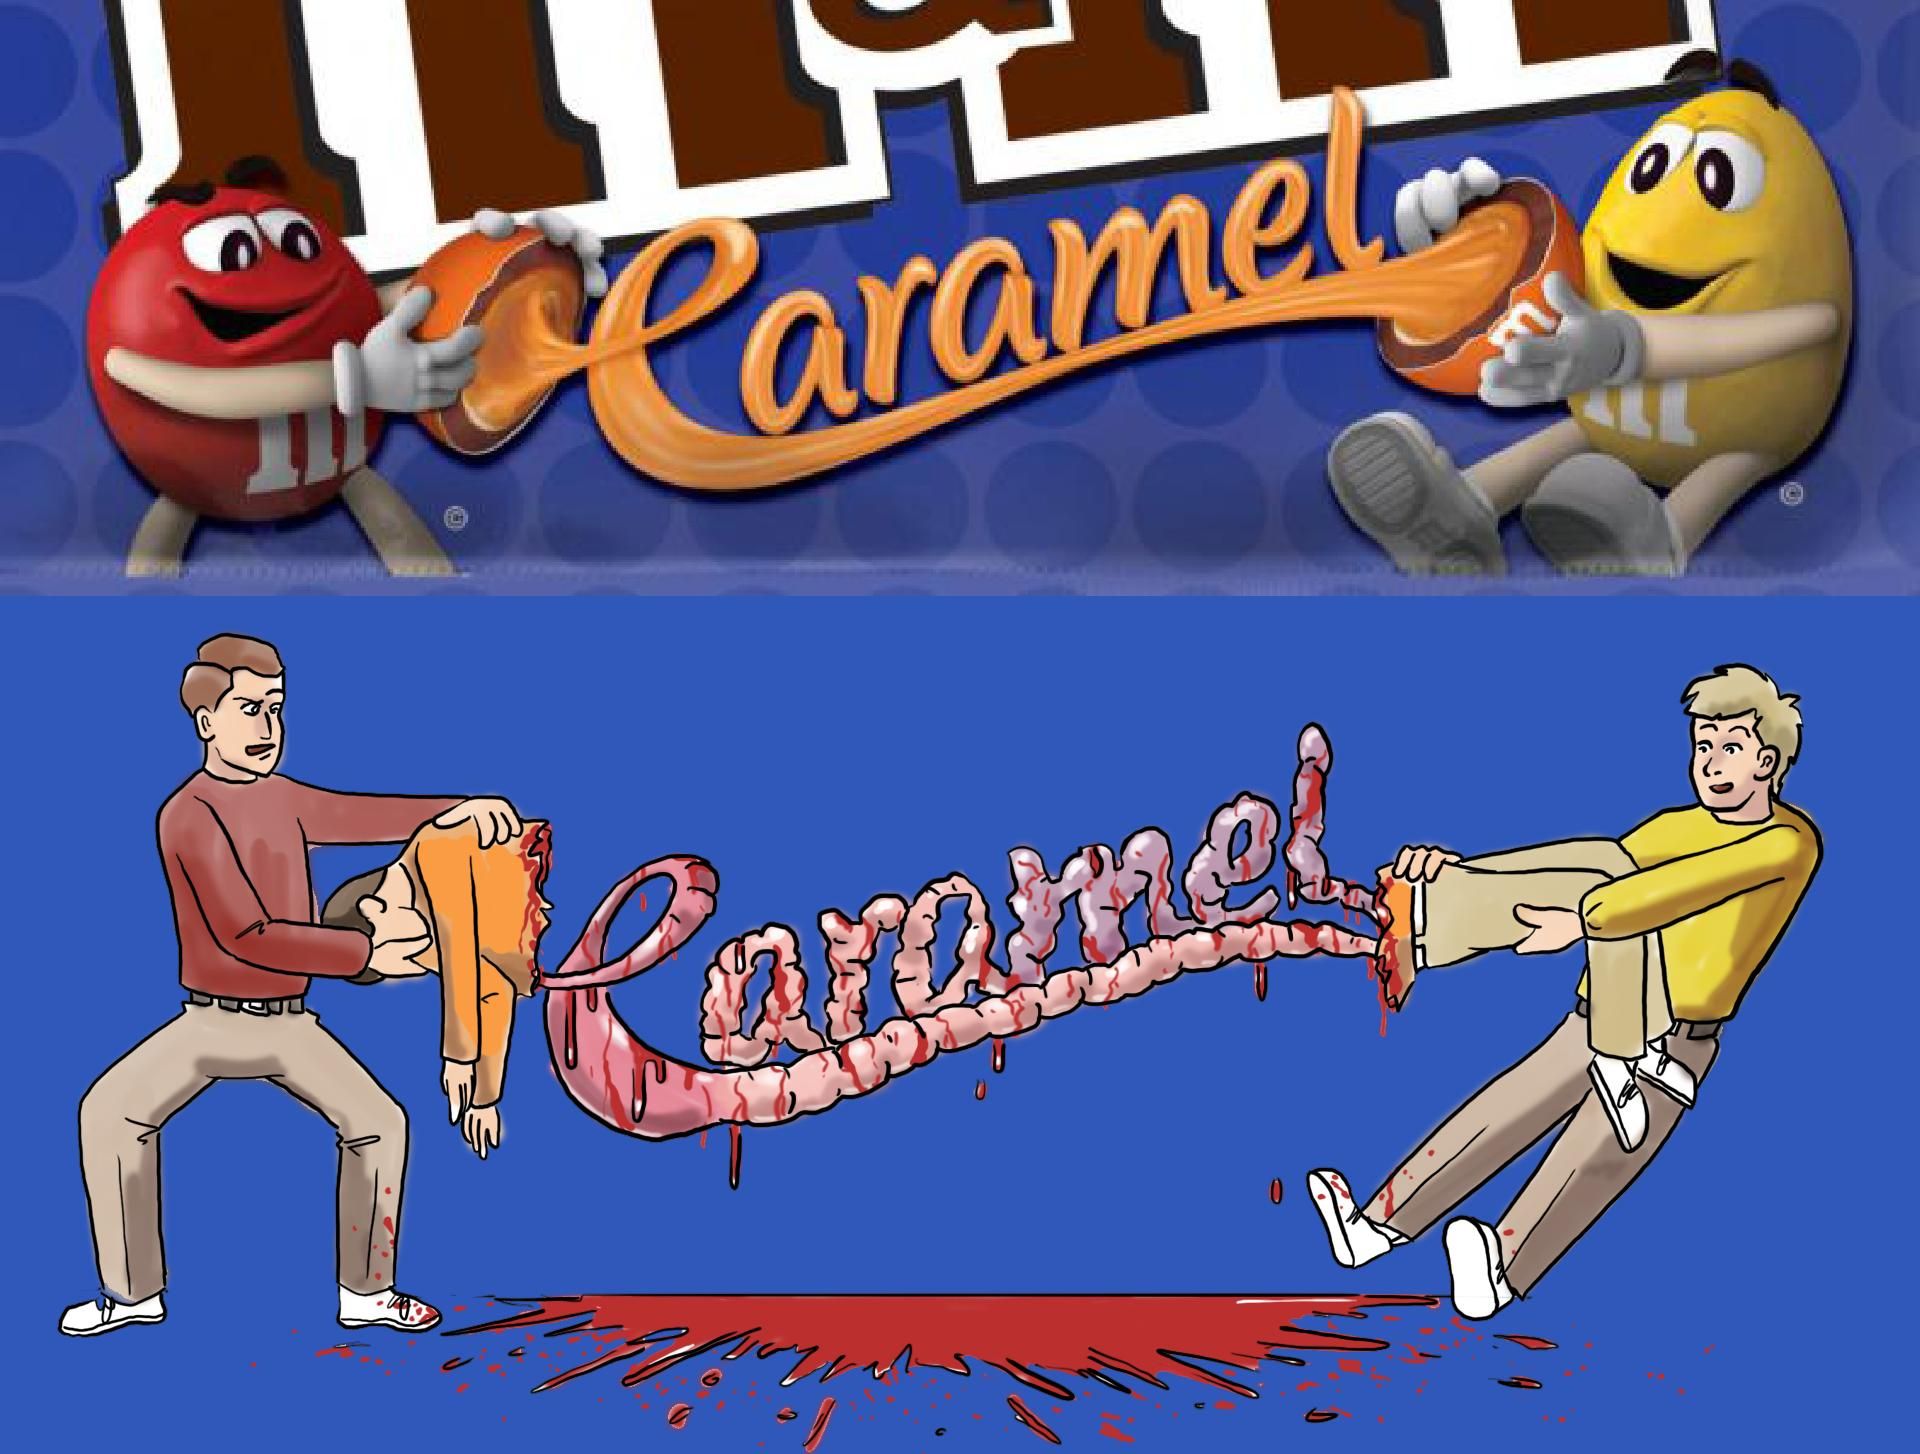 What the M&M's Caramel logo basically is